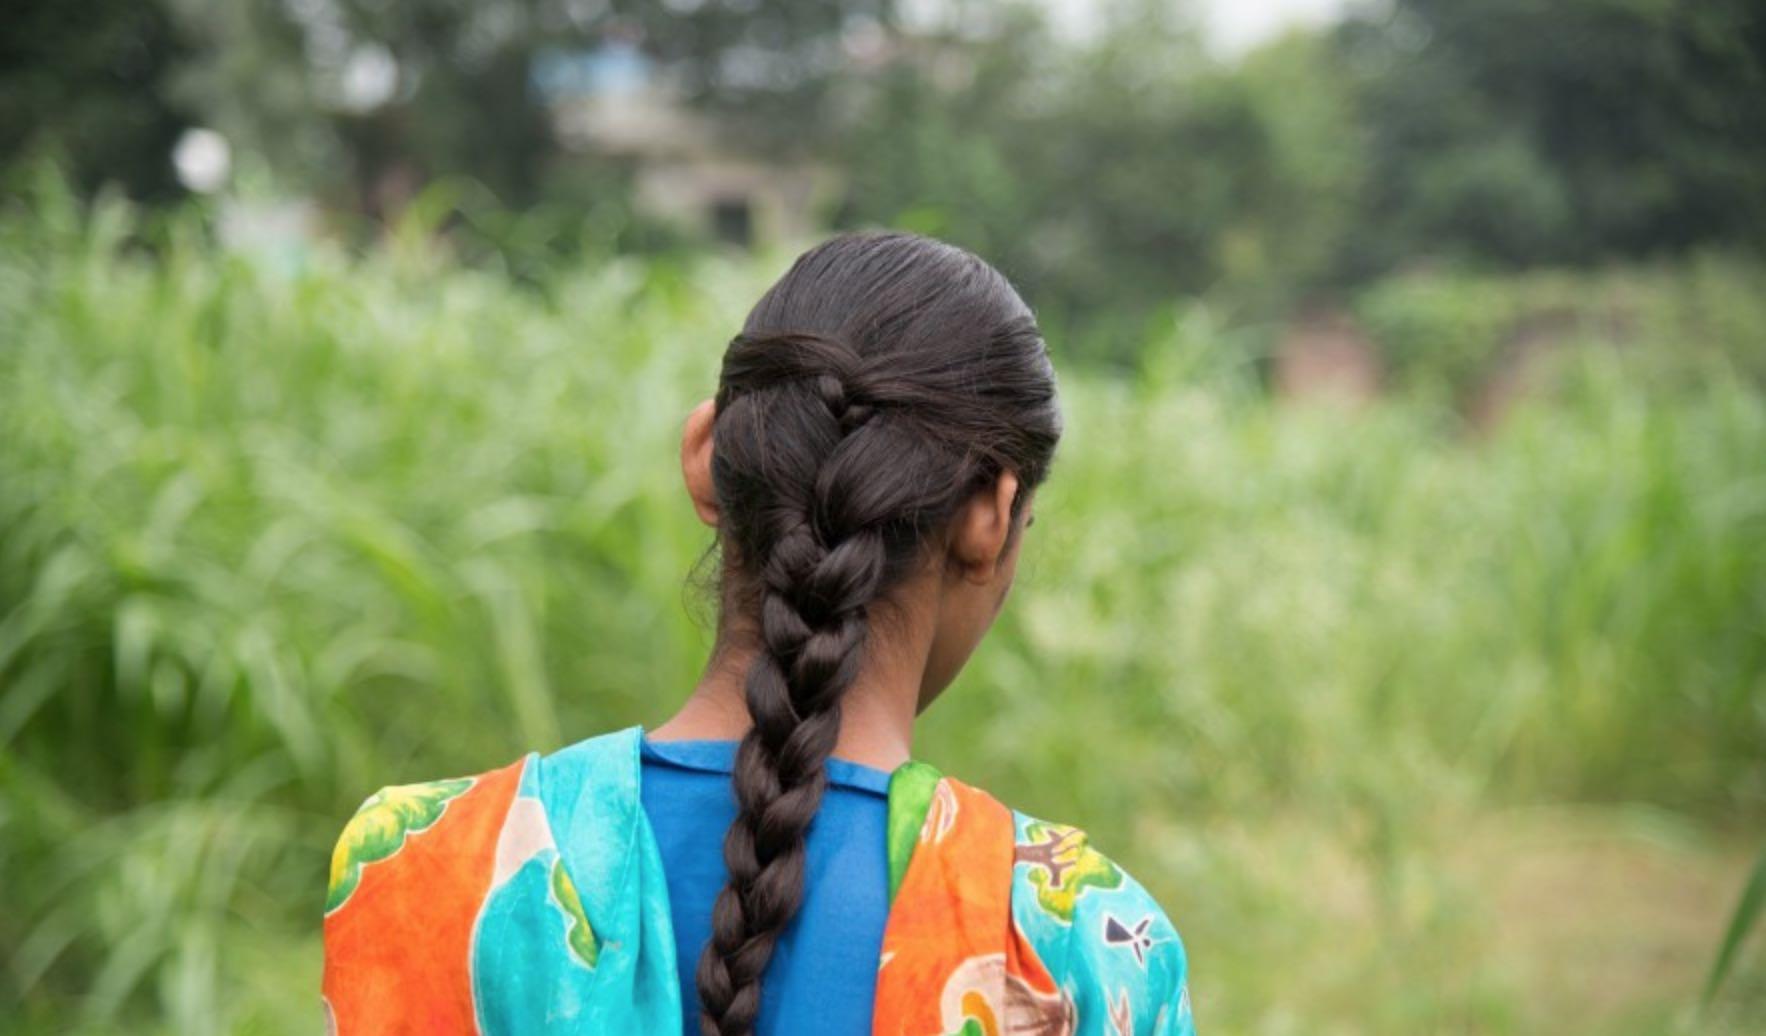 Razia, who has an intellectual disability and difficulties with speech, is depicted with her back to the camera looks out and wearing traditional patterns from India.